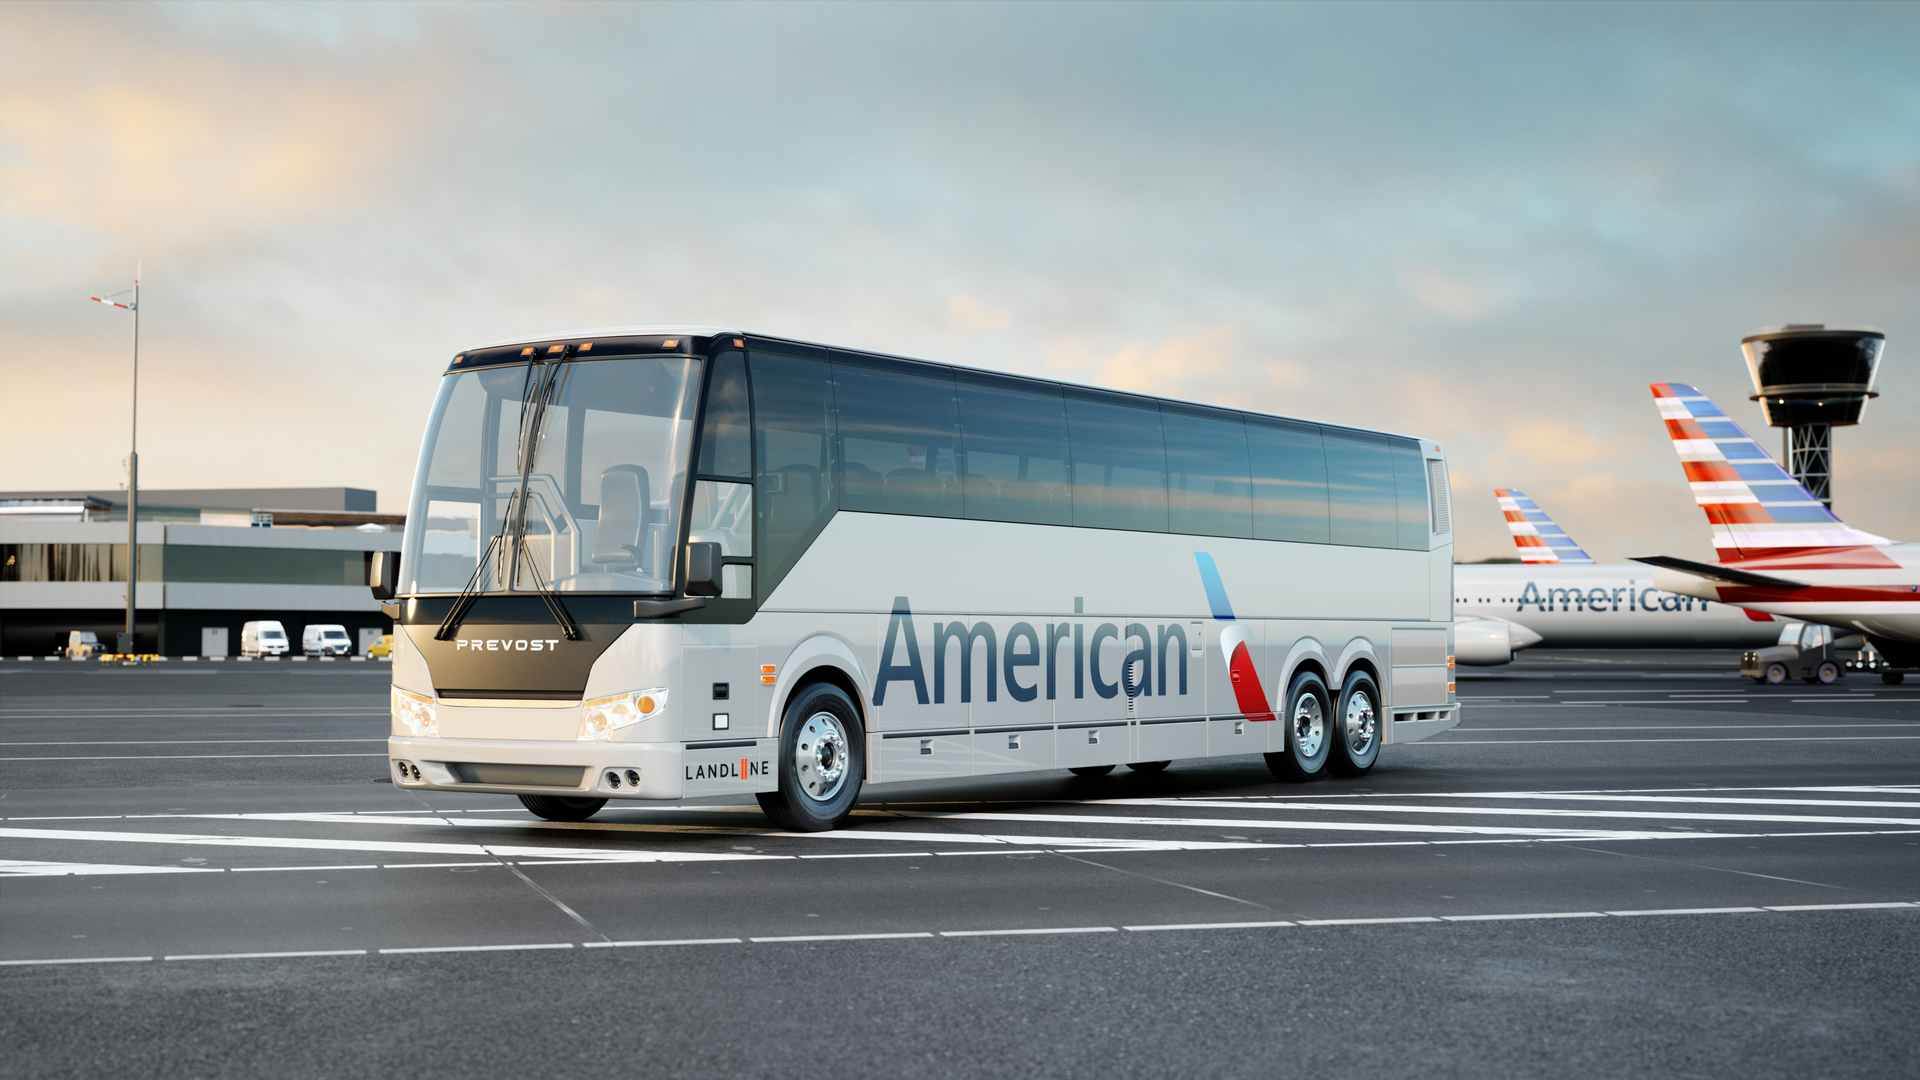 A white bus emblazoned with the logo of American Airlines is parked in a parking lot